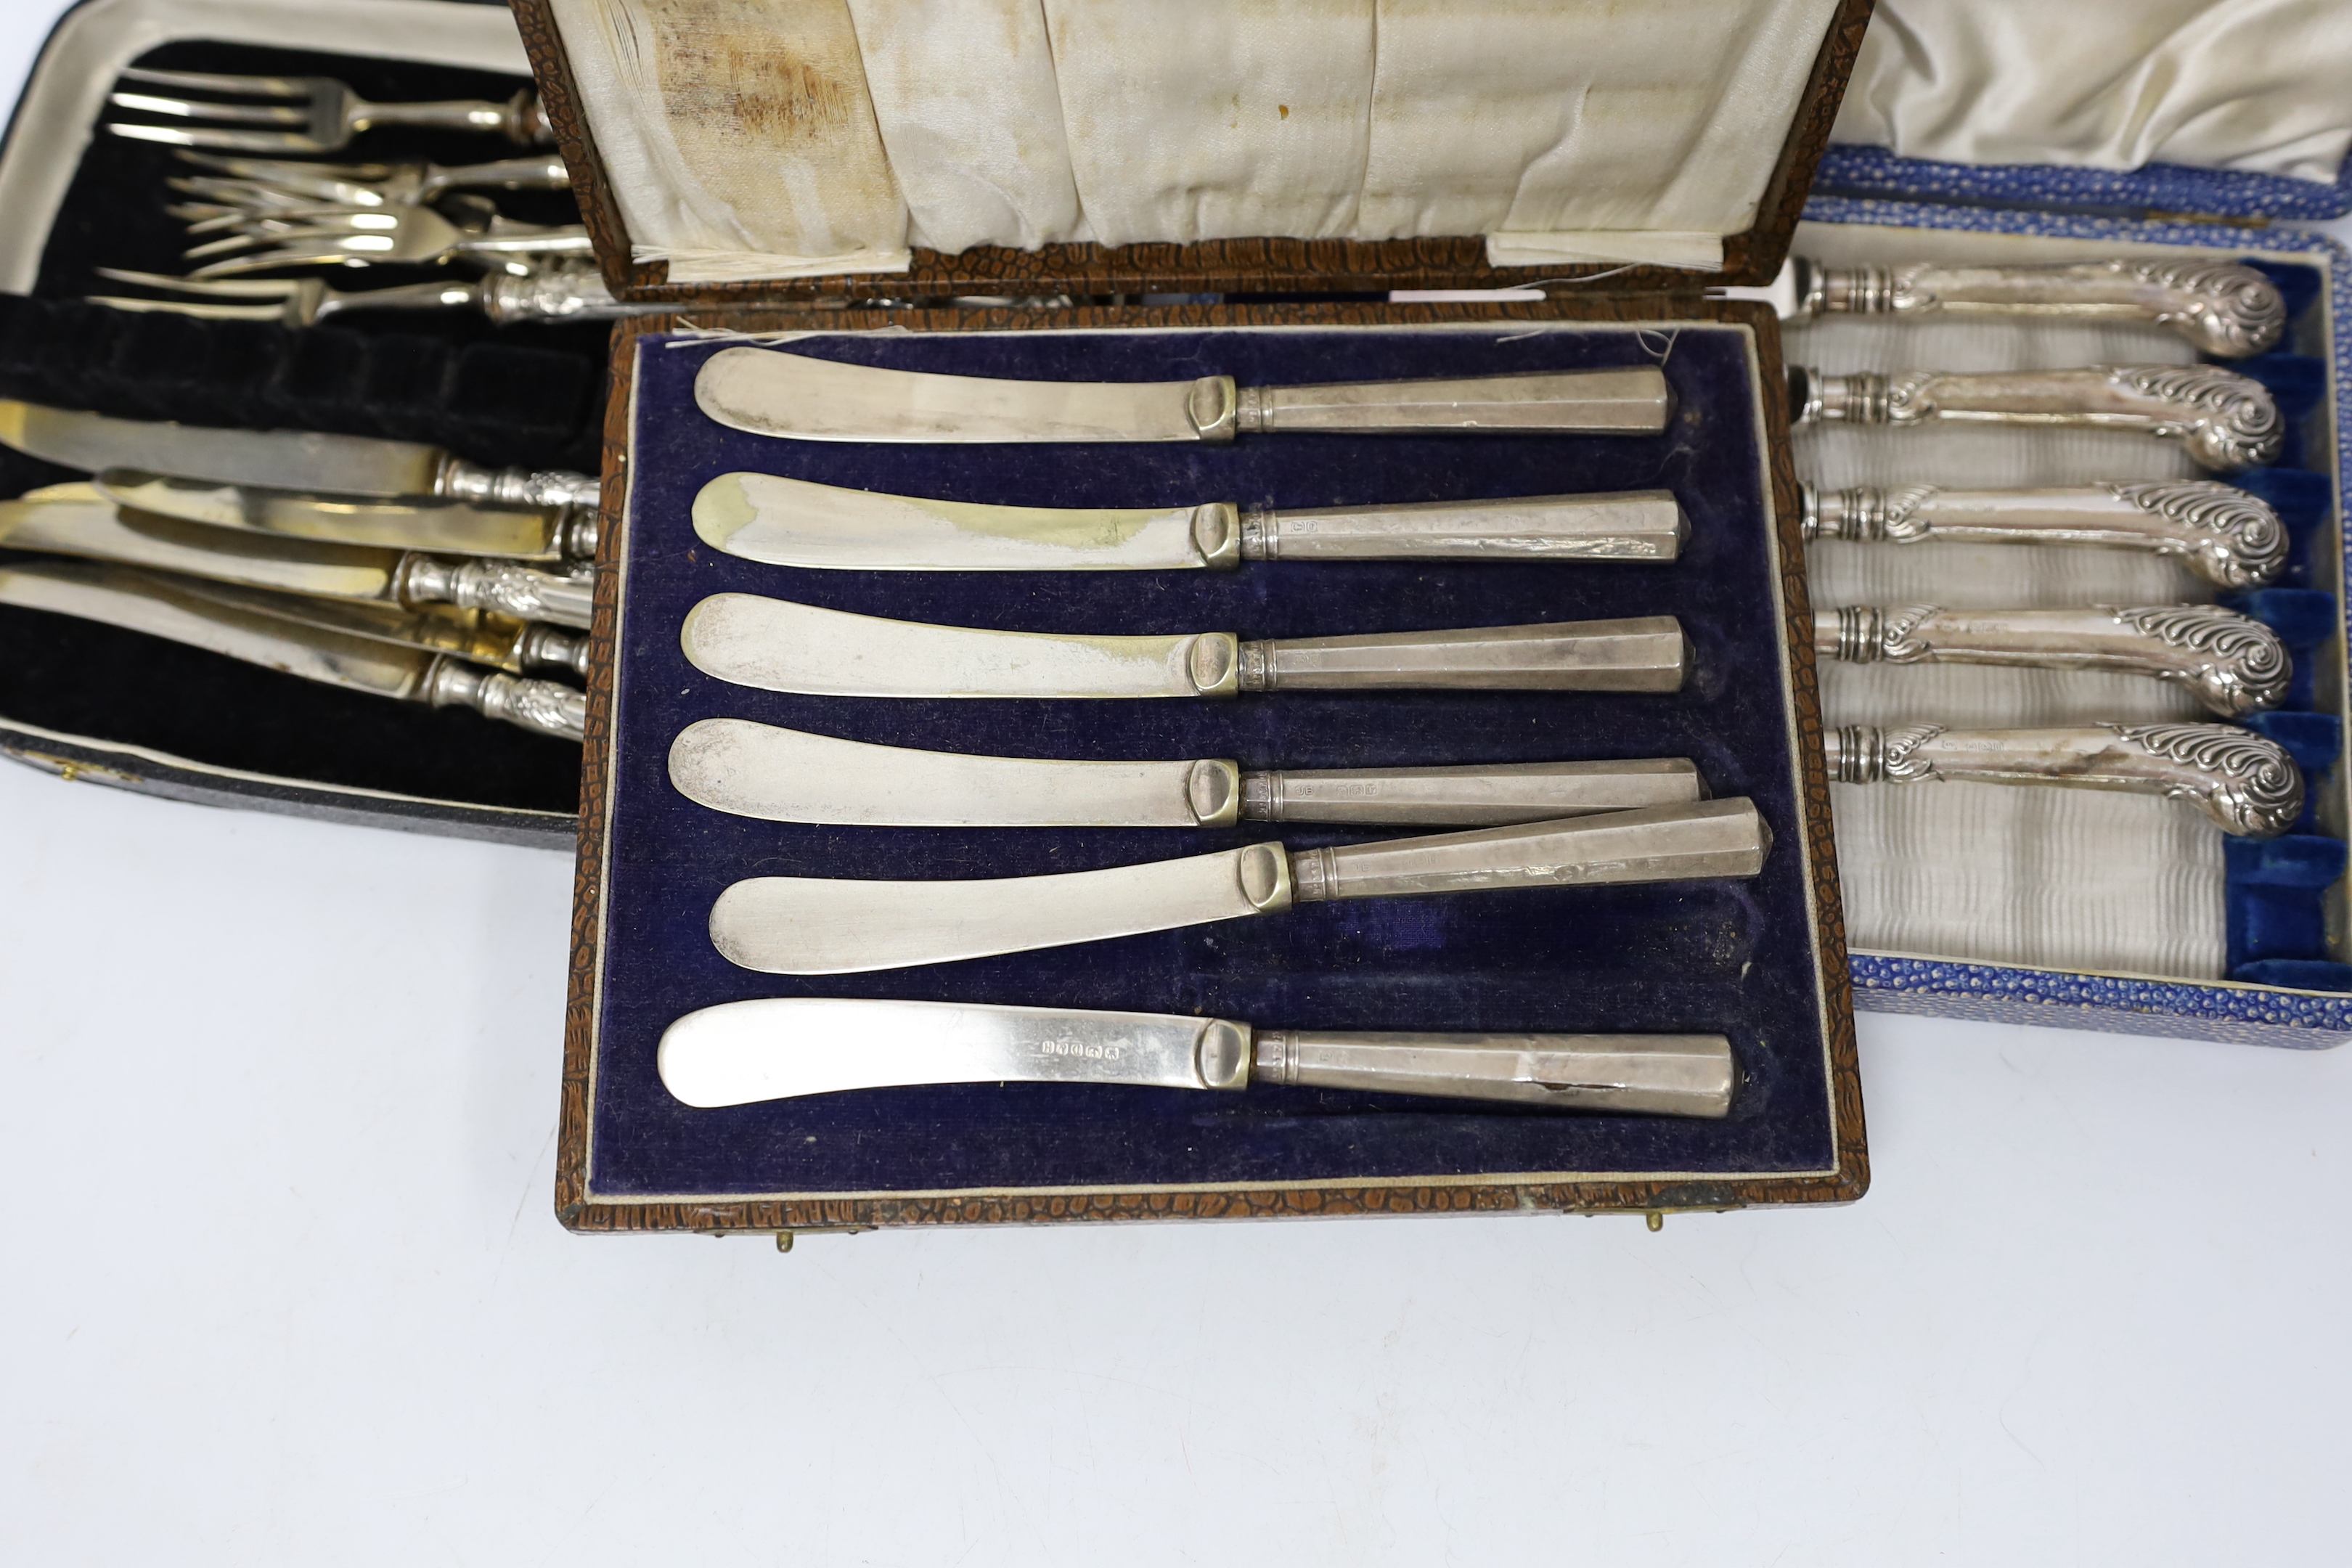 Six pairs of German Art Nouveau 800 standard white metal handled dessert eaters and two cased sets of six silver handled tea knives(one knife missing).